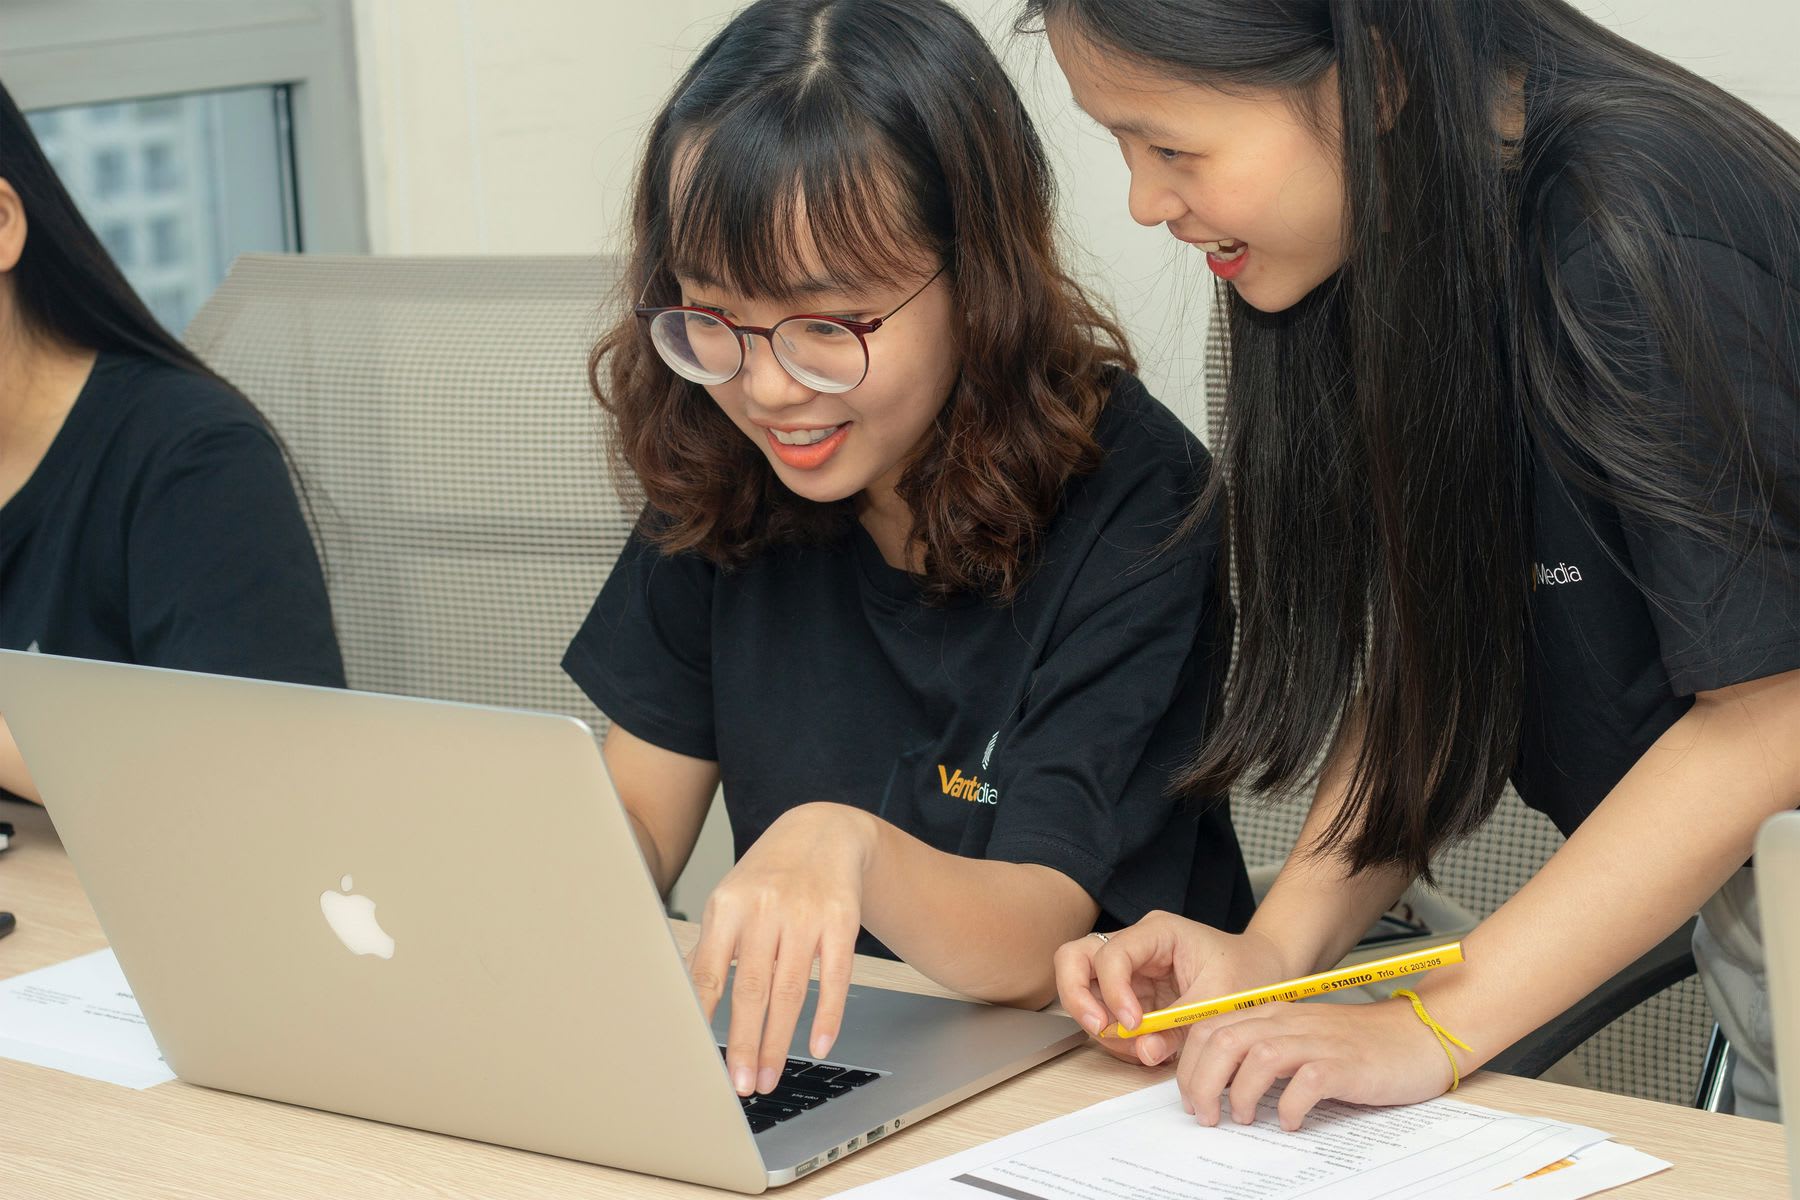 Two women sharing a laptop during a school activity